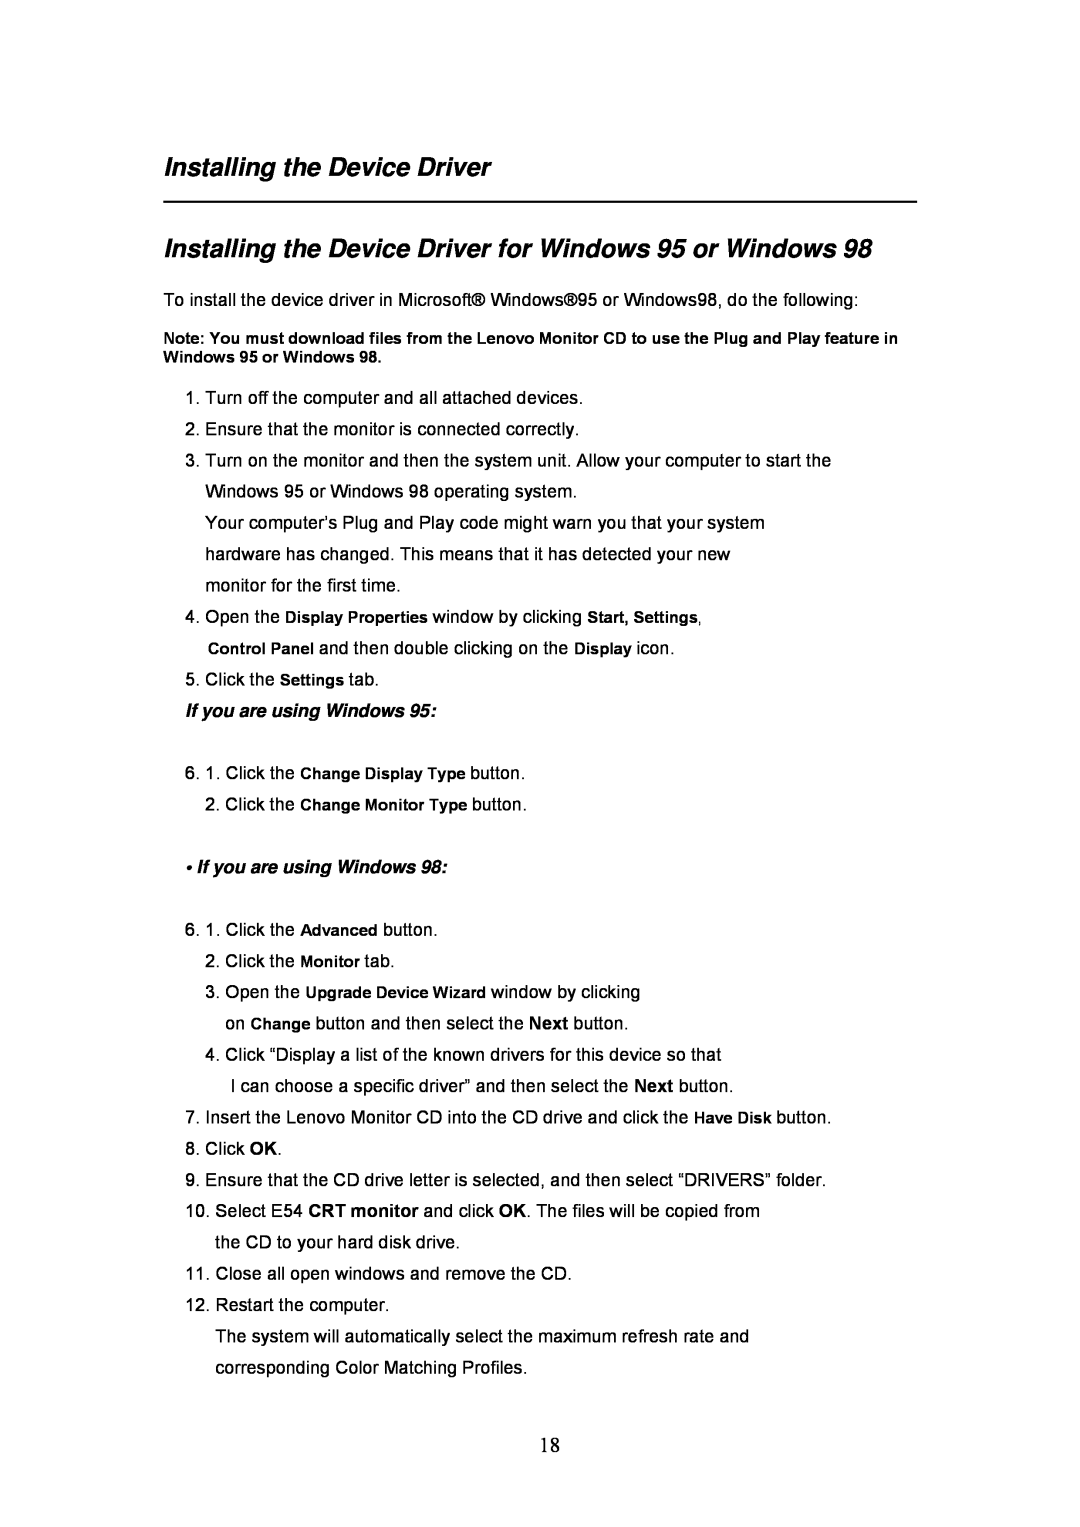 Lenovo E54 manual Installing the Device Driver for Windows 95 or Windows, If you are using Windows 